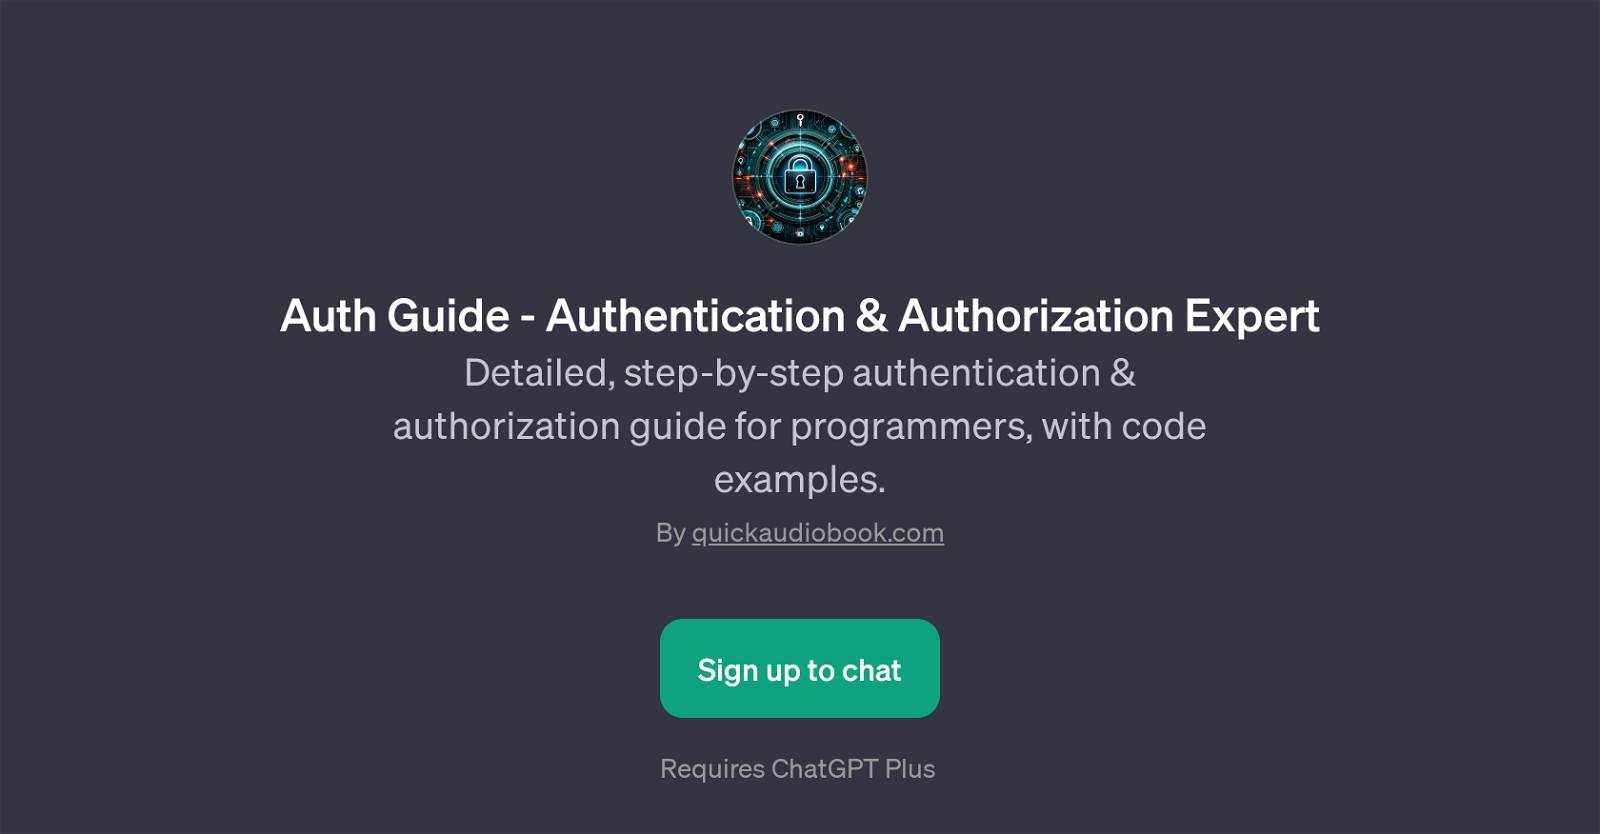 Auth Guide - Authentication & Authorization Expert website